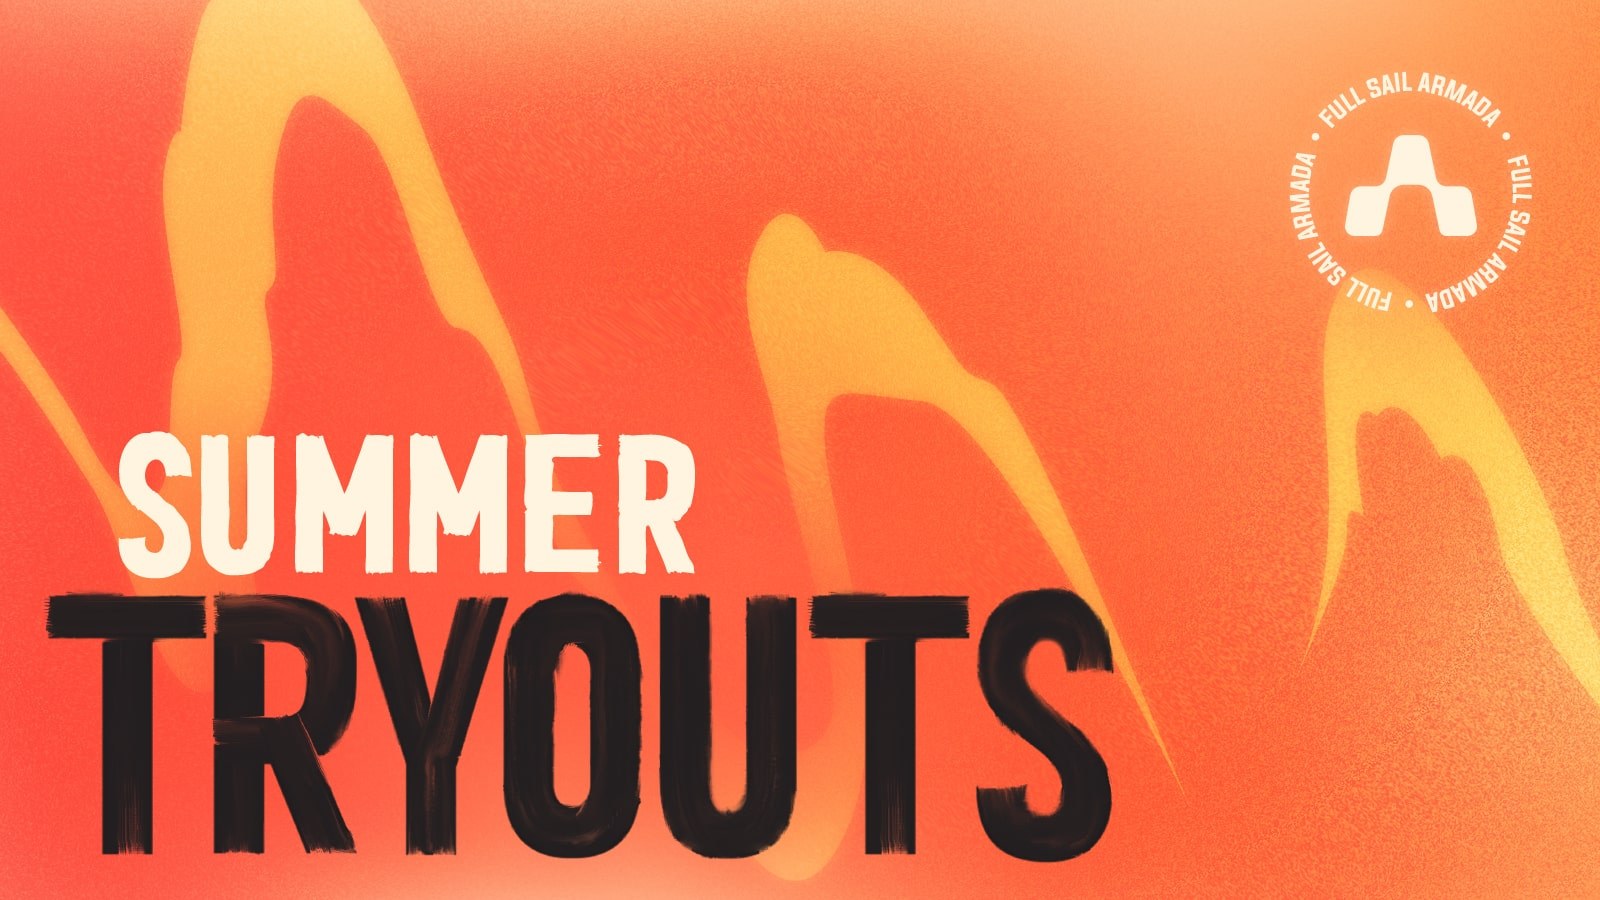 The words "Summer Tryouts" in white and black in a stylized font reminiscent of a heatwave placed in the lower left-hand corner of an orange graphic with the Full Sail Armada logo appearing in white in the upper right-hand corner.